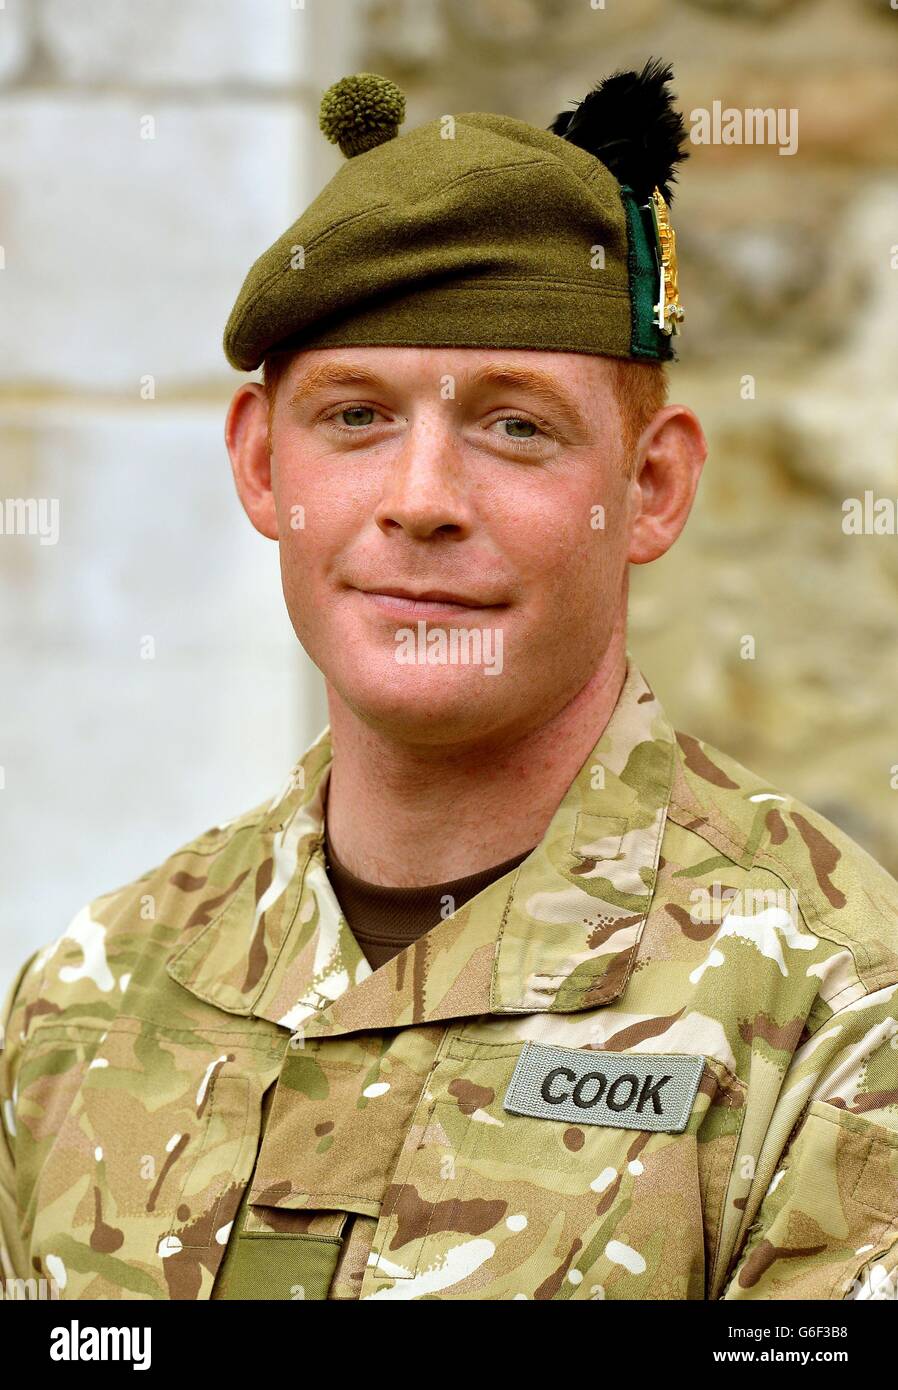 Cpl Richard Cook of the Royal Regiment of Scotland who has been mentioned in dispatches, ahead of the full Operational Honours List 41 that will be published in the London Gazette on Friday. Stock Photo